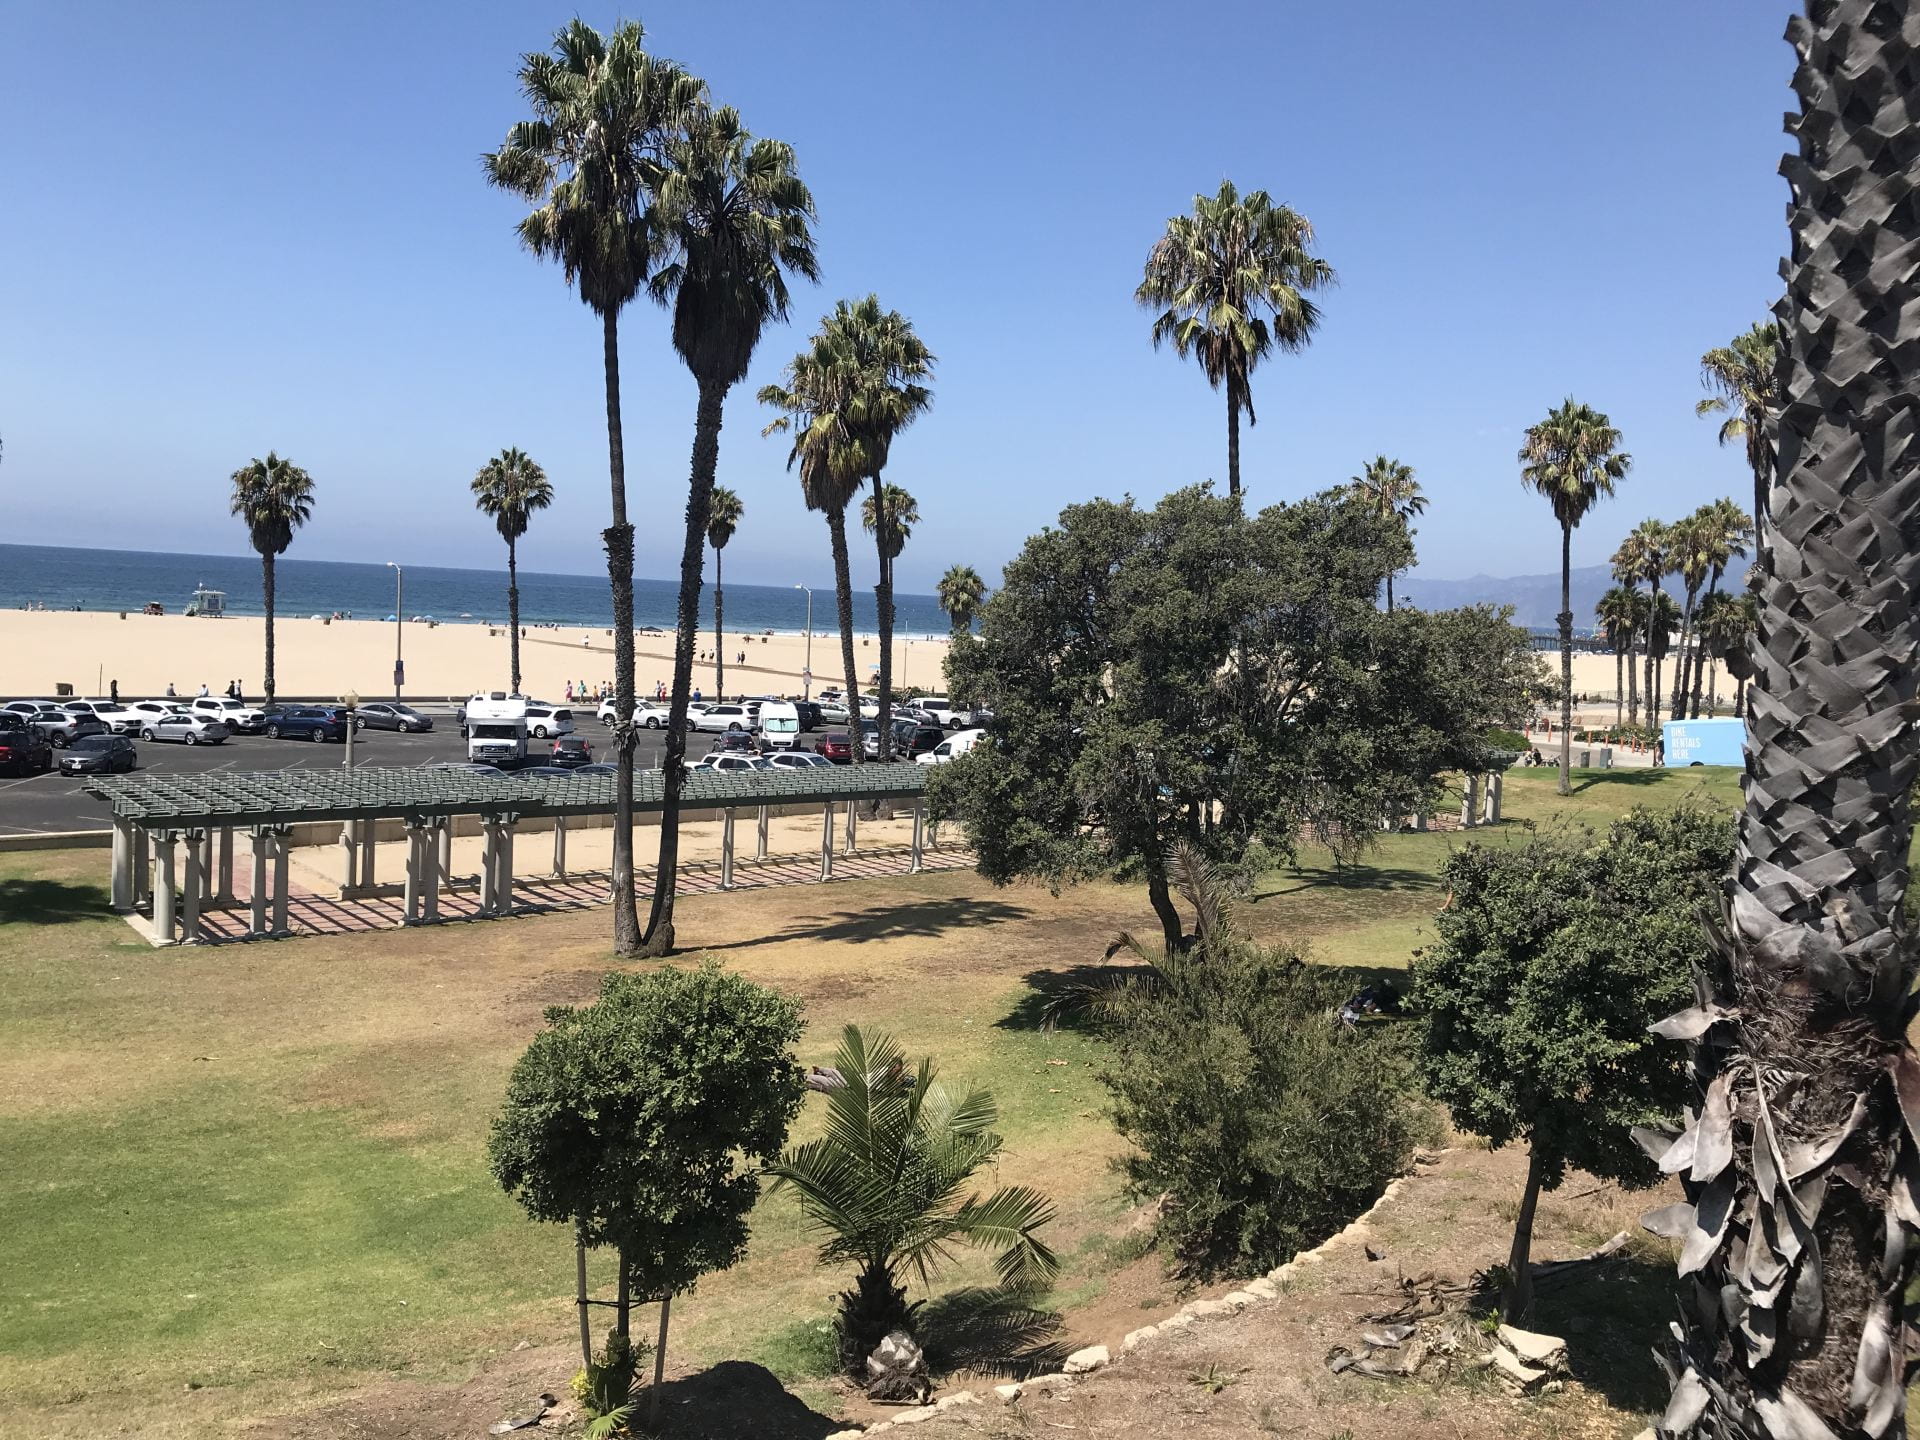 Wide view of a park with palm trees, pergola, and the beach and ocean in the background.